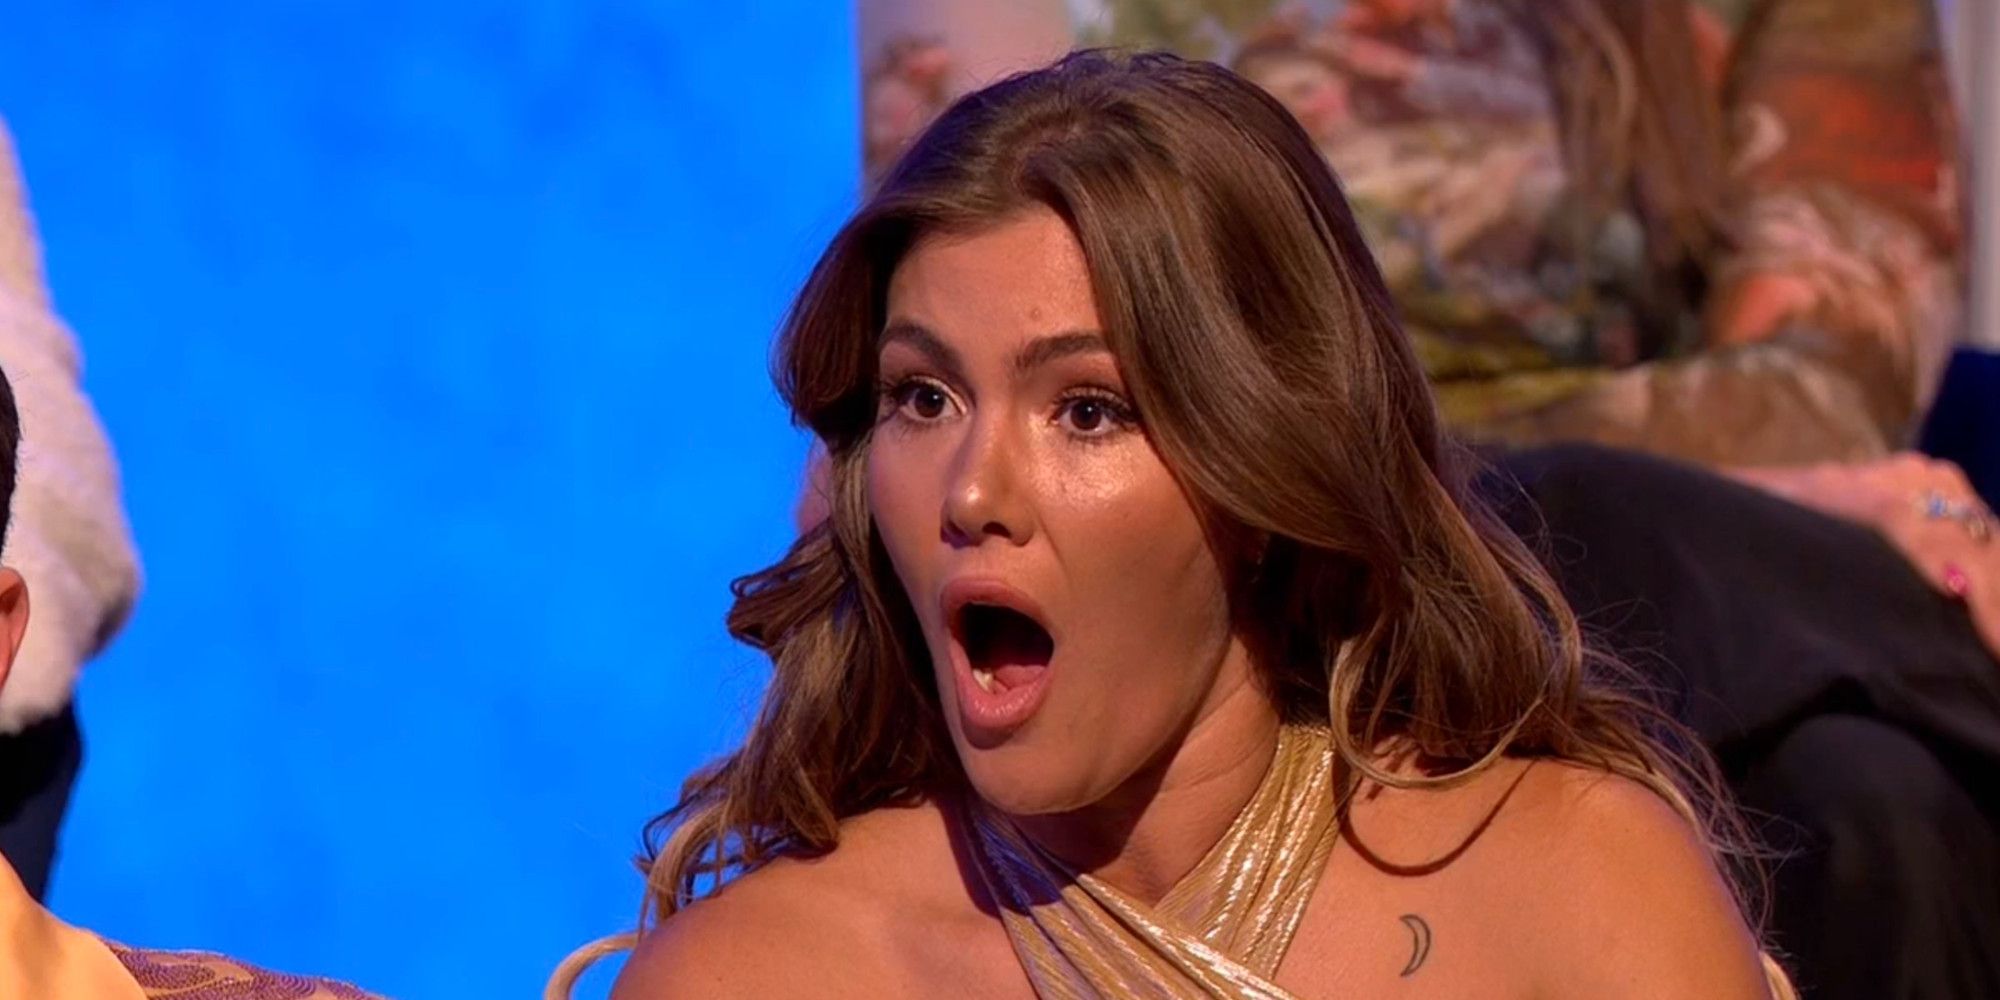 Tori Deal at the Challenge: Ride or Dies reunion. She is sitting against a blue background with her mouth open in shock and a surprised look on her face. Her long brown hair is down and she is wearing a gold top. 